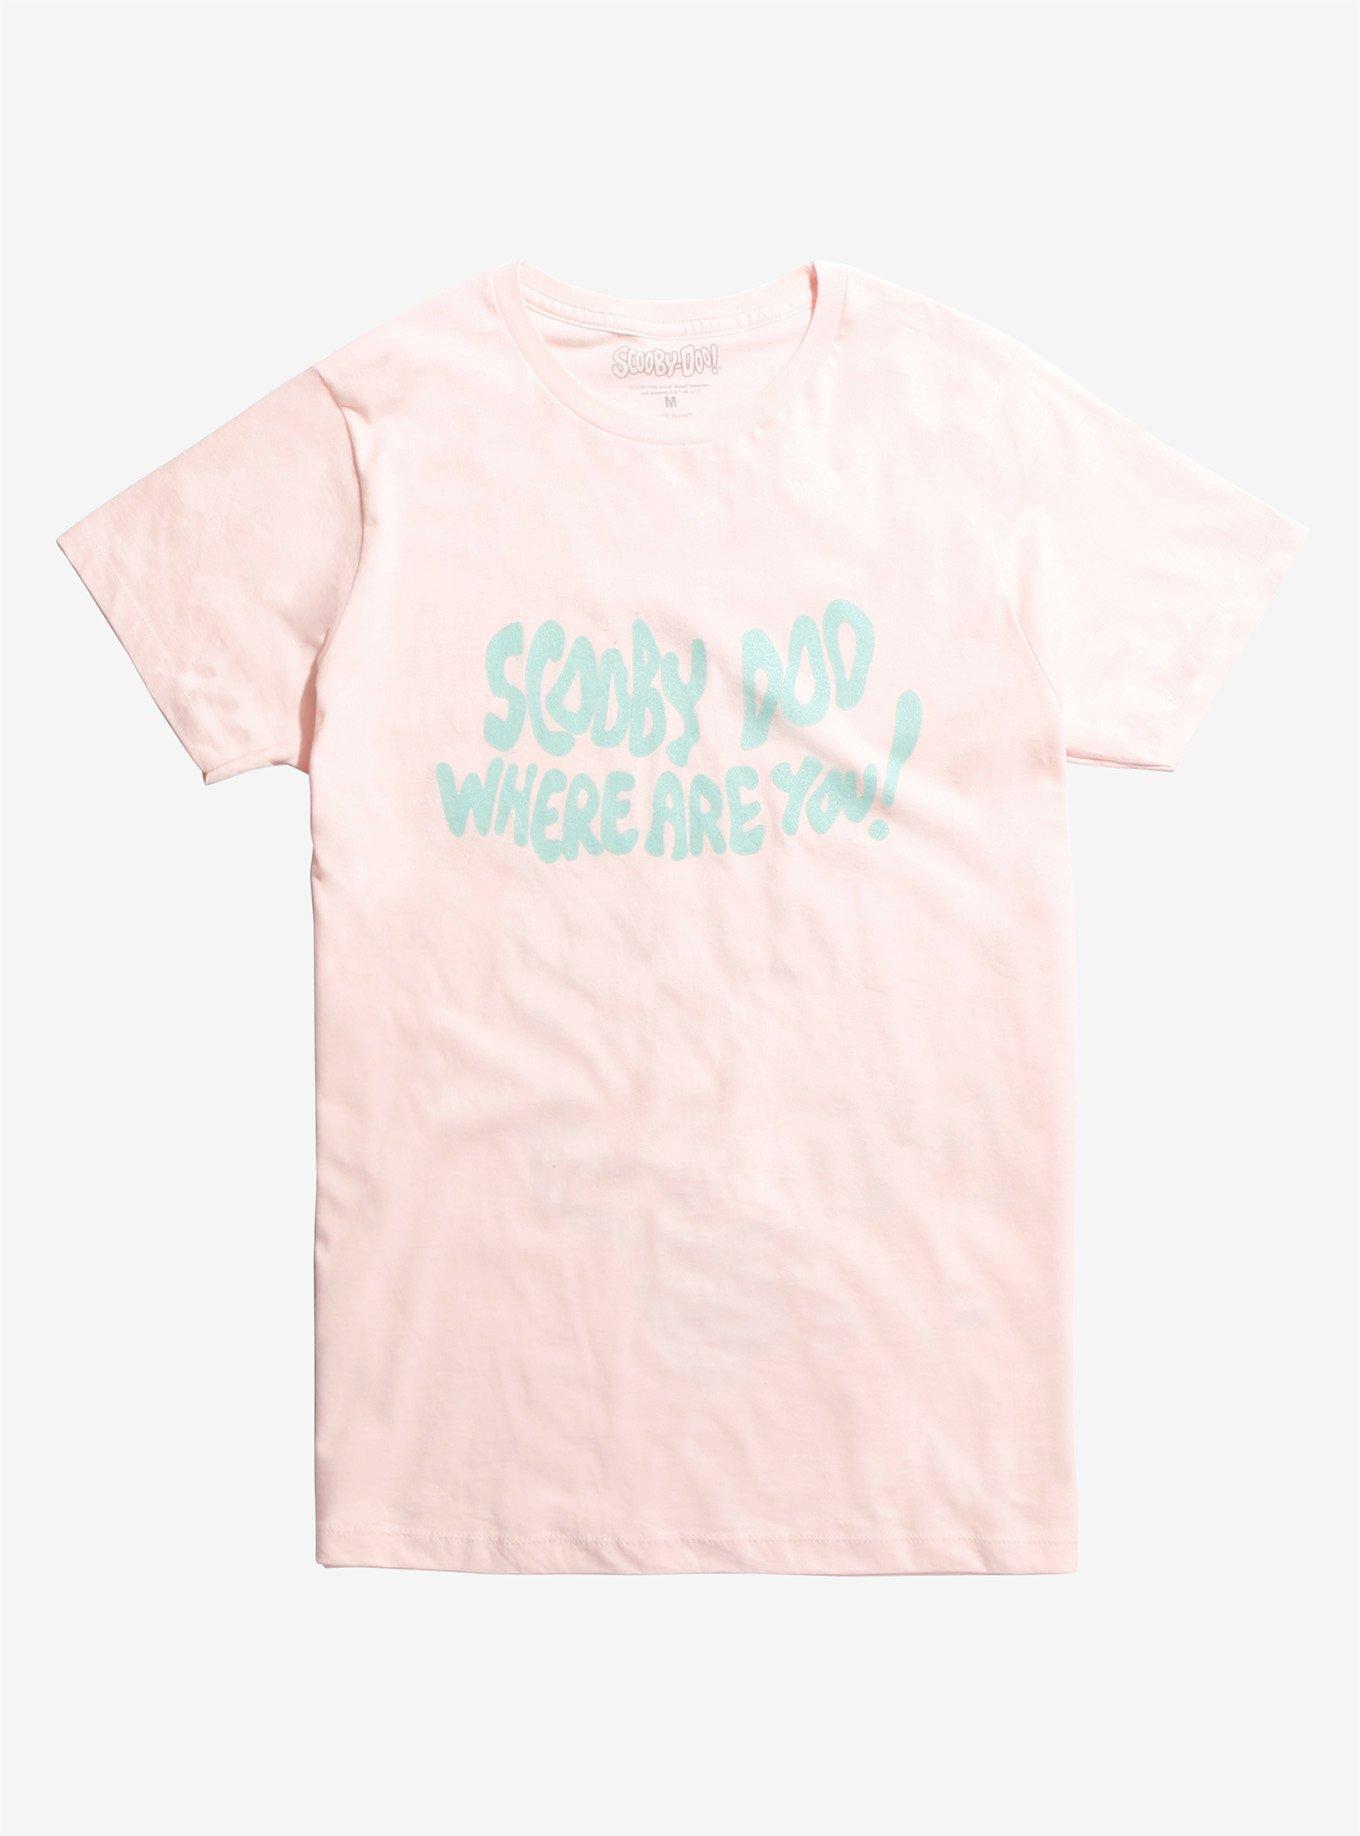 Scooby-Doo Where Are You! T-Shirt, PINK, hi-res